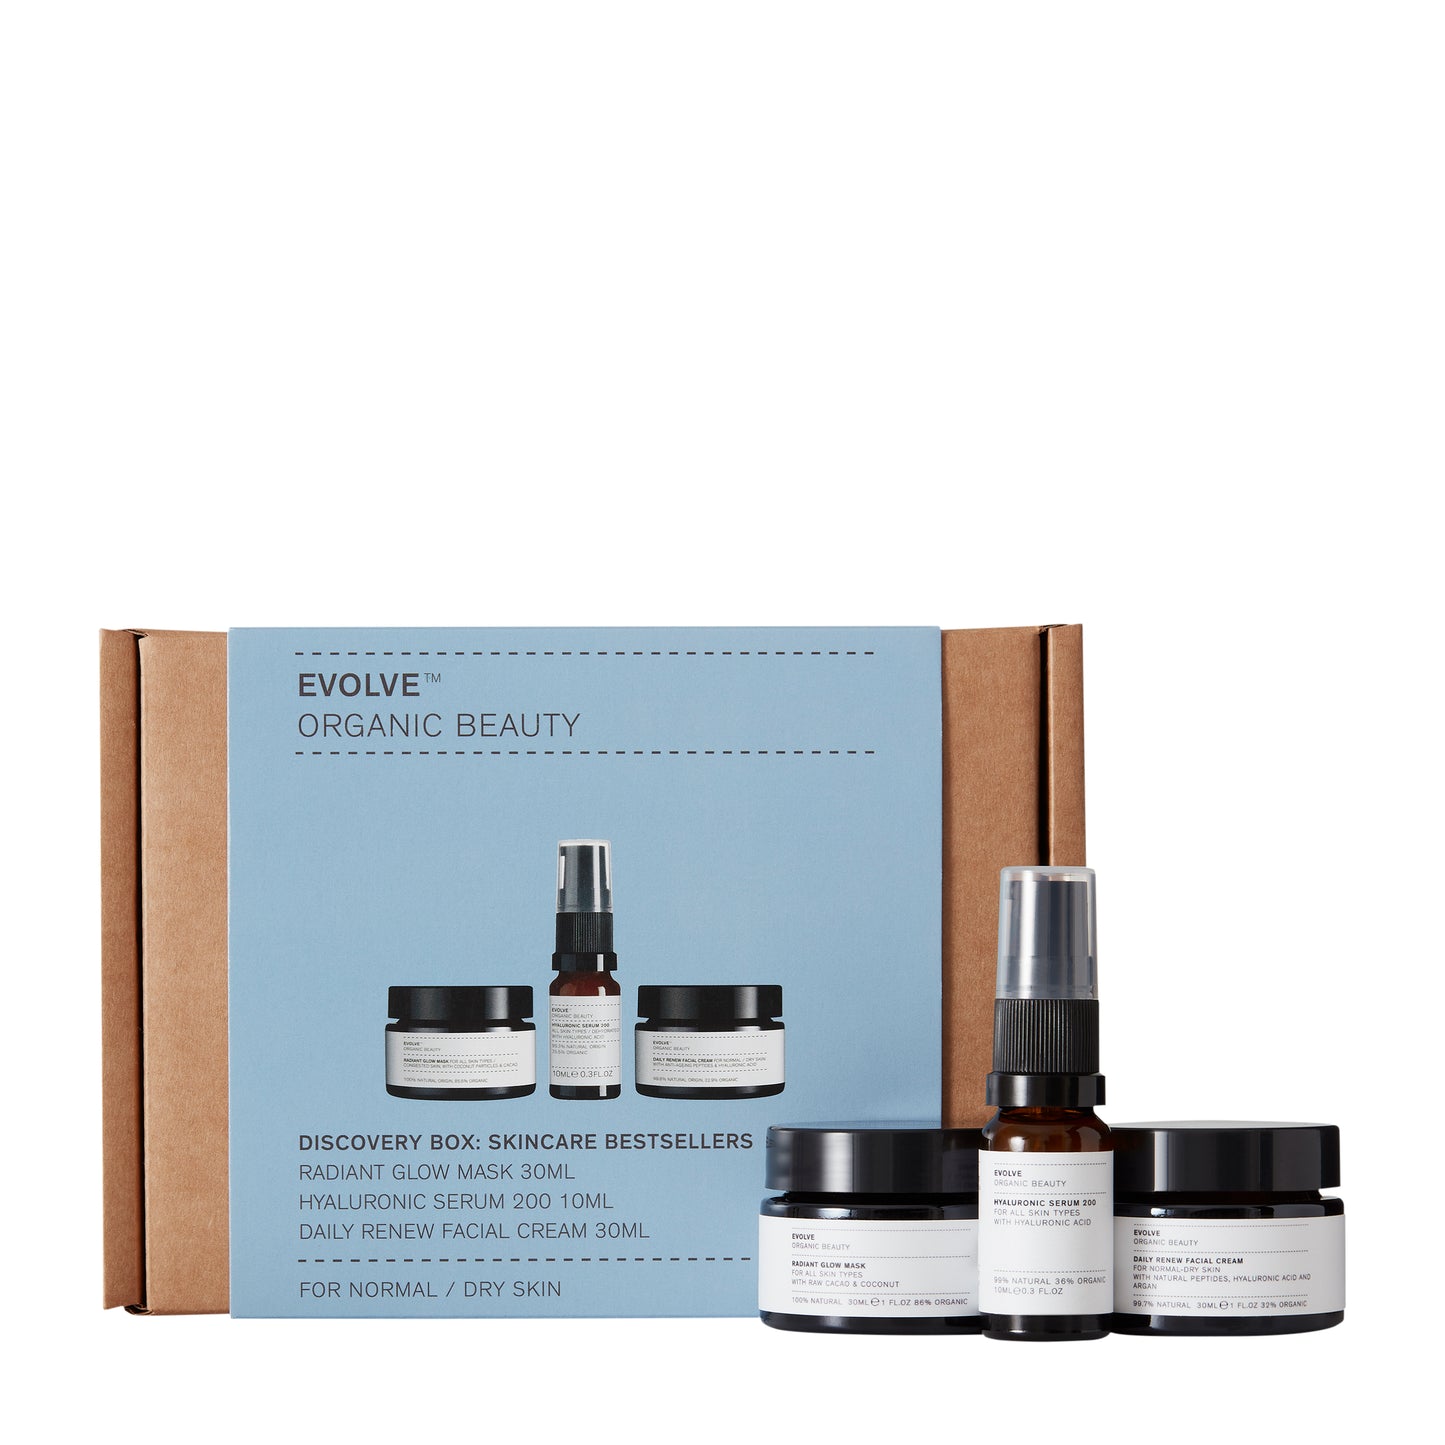 EVOLVE - DISCOVERY SKIN CARE BESTSELLERS 1 Stk.